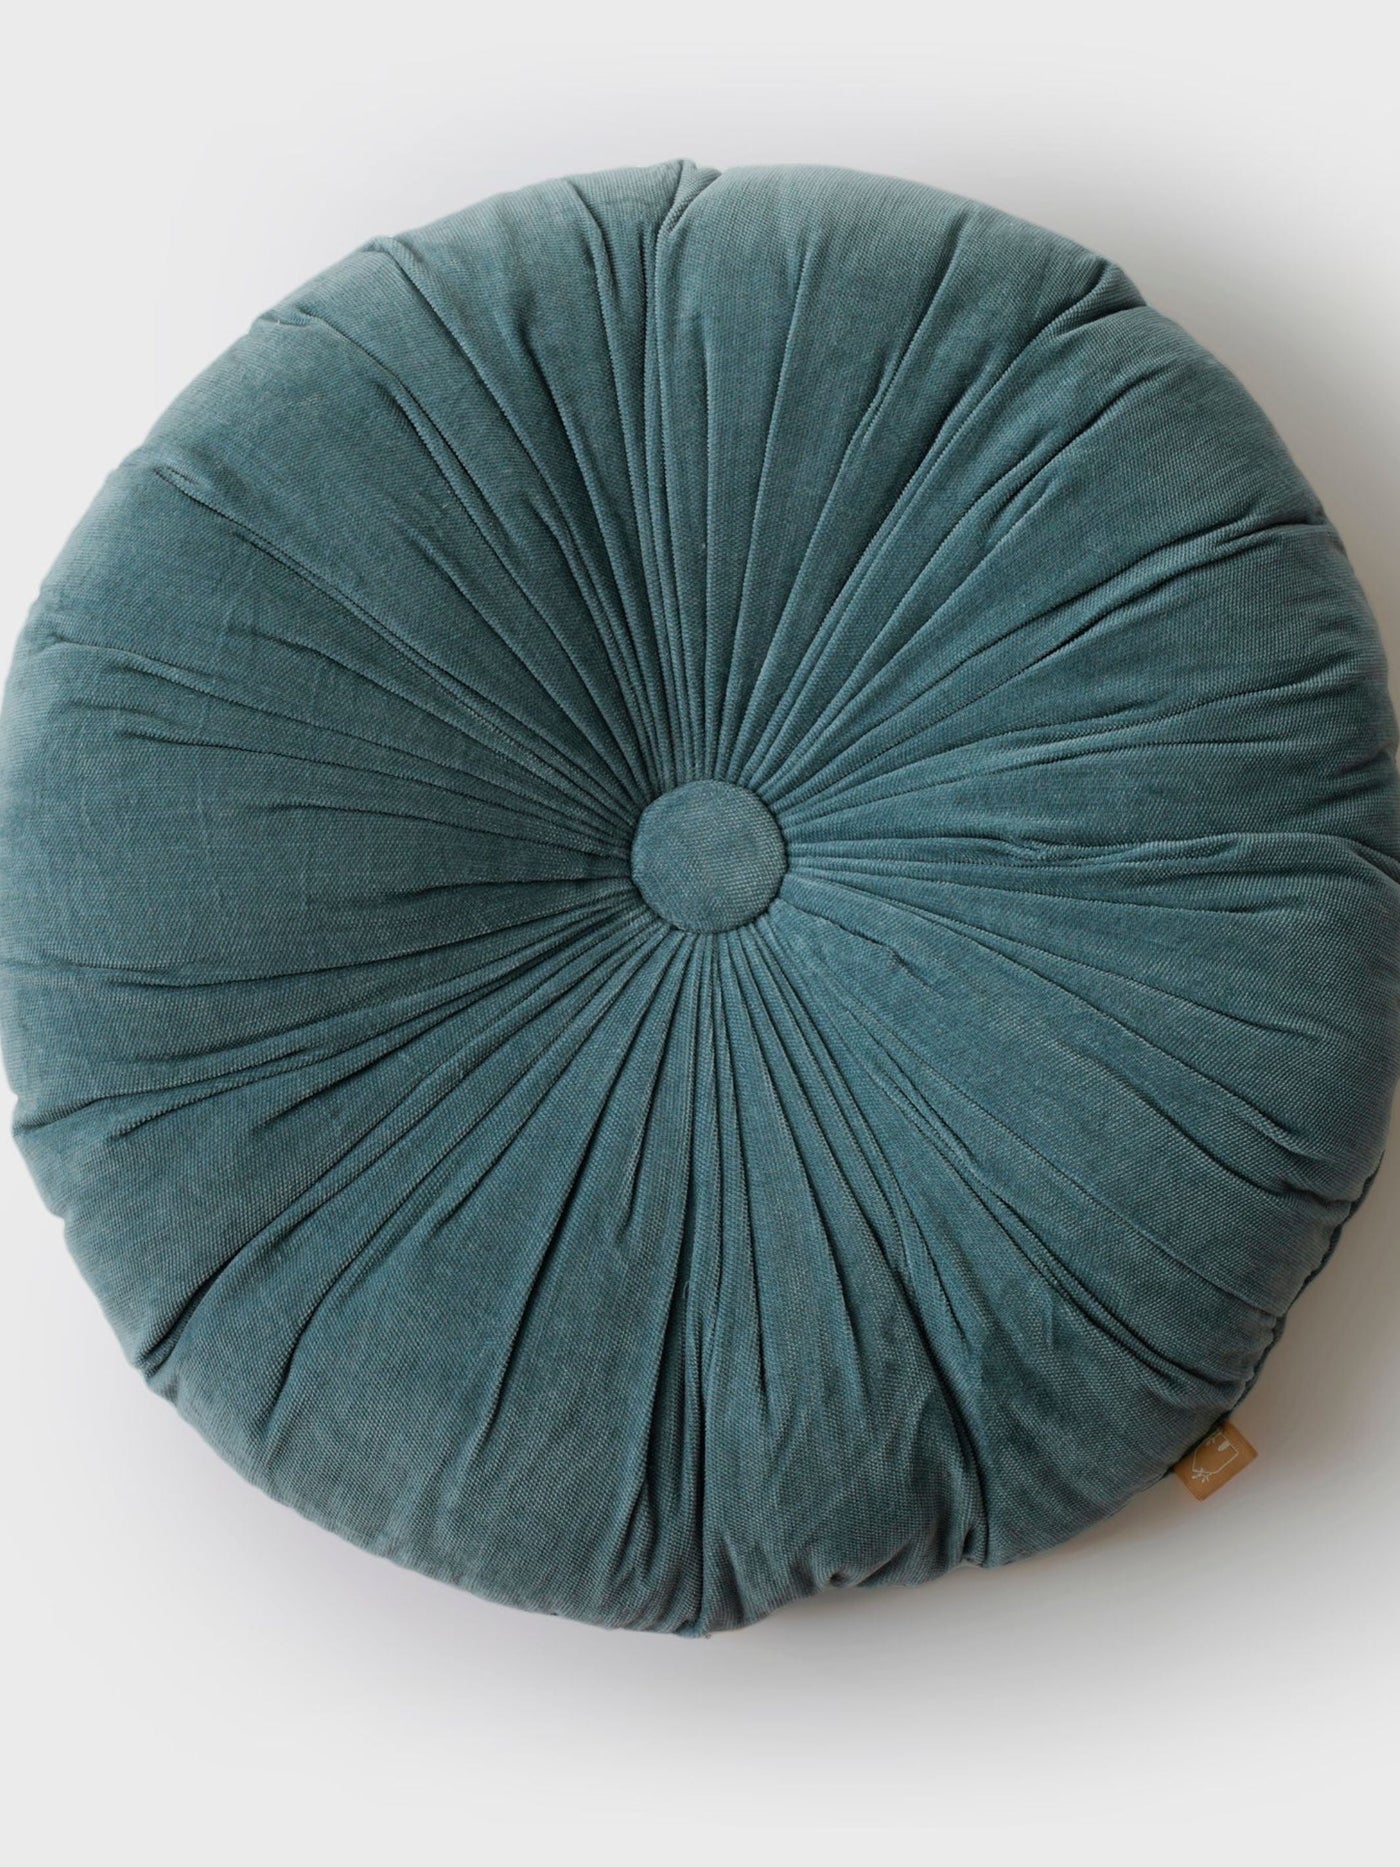 Round Cushion Cover - Cuddle Teal